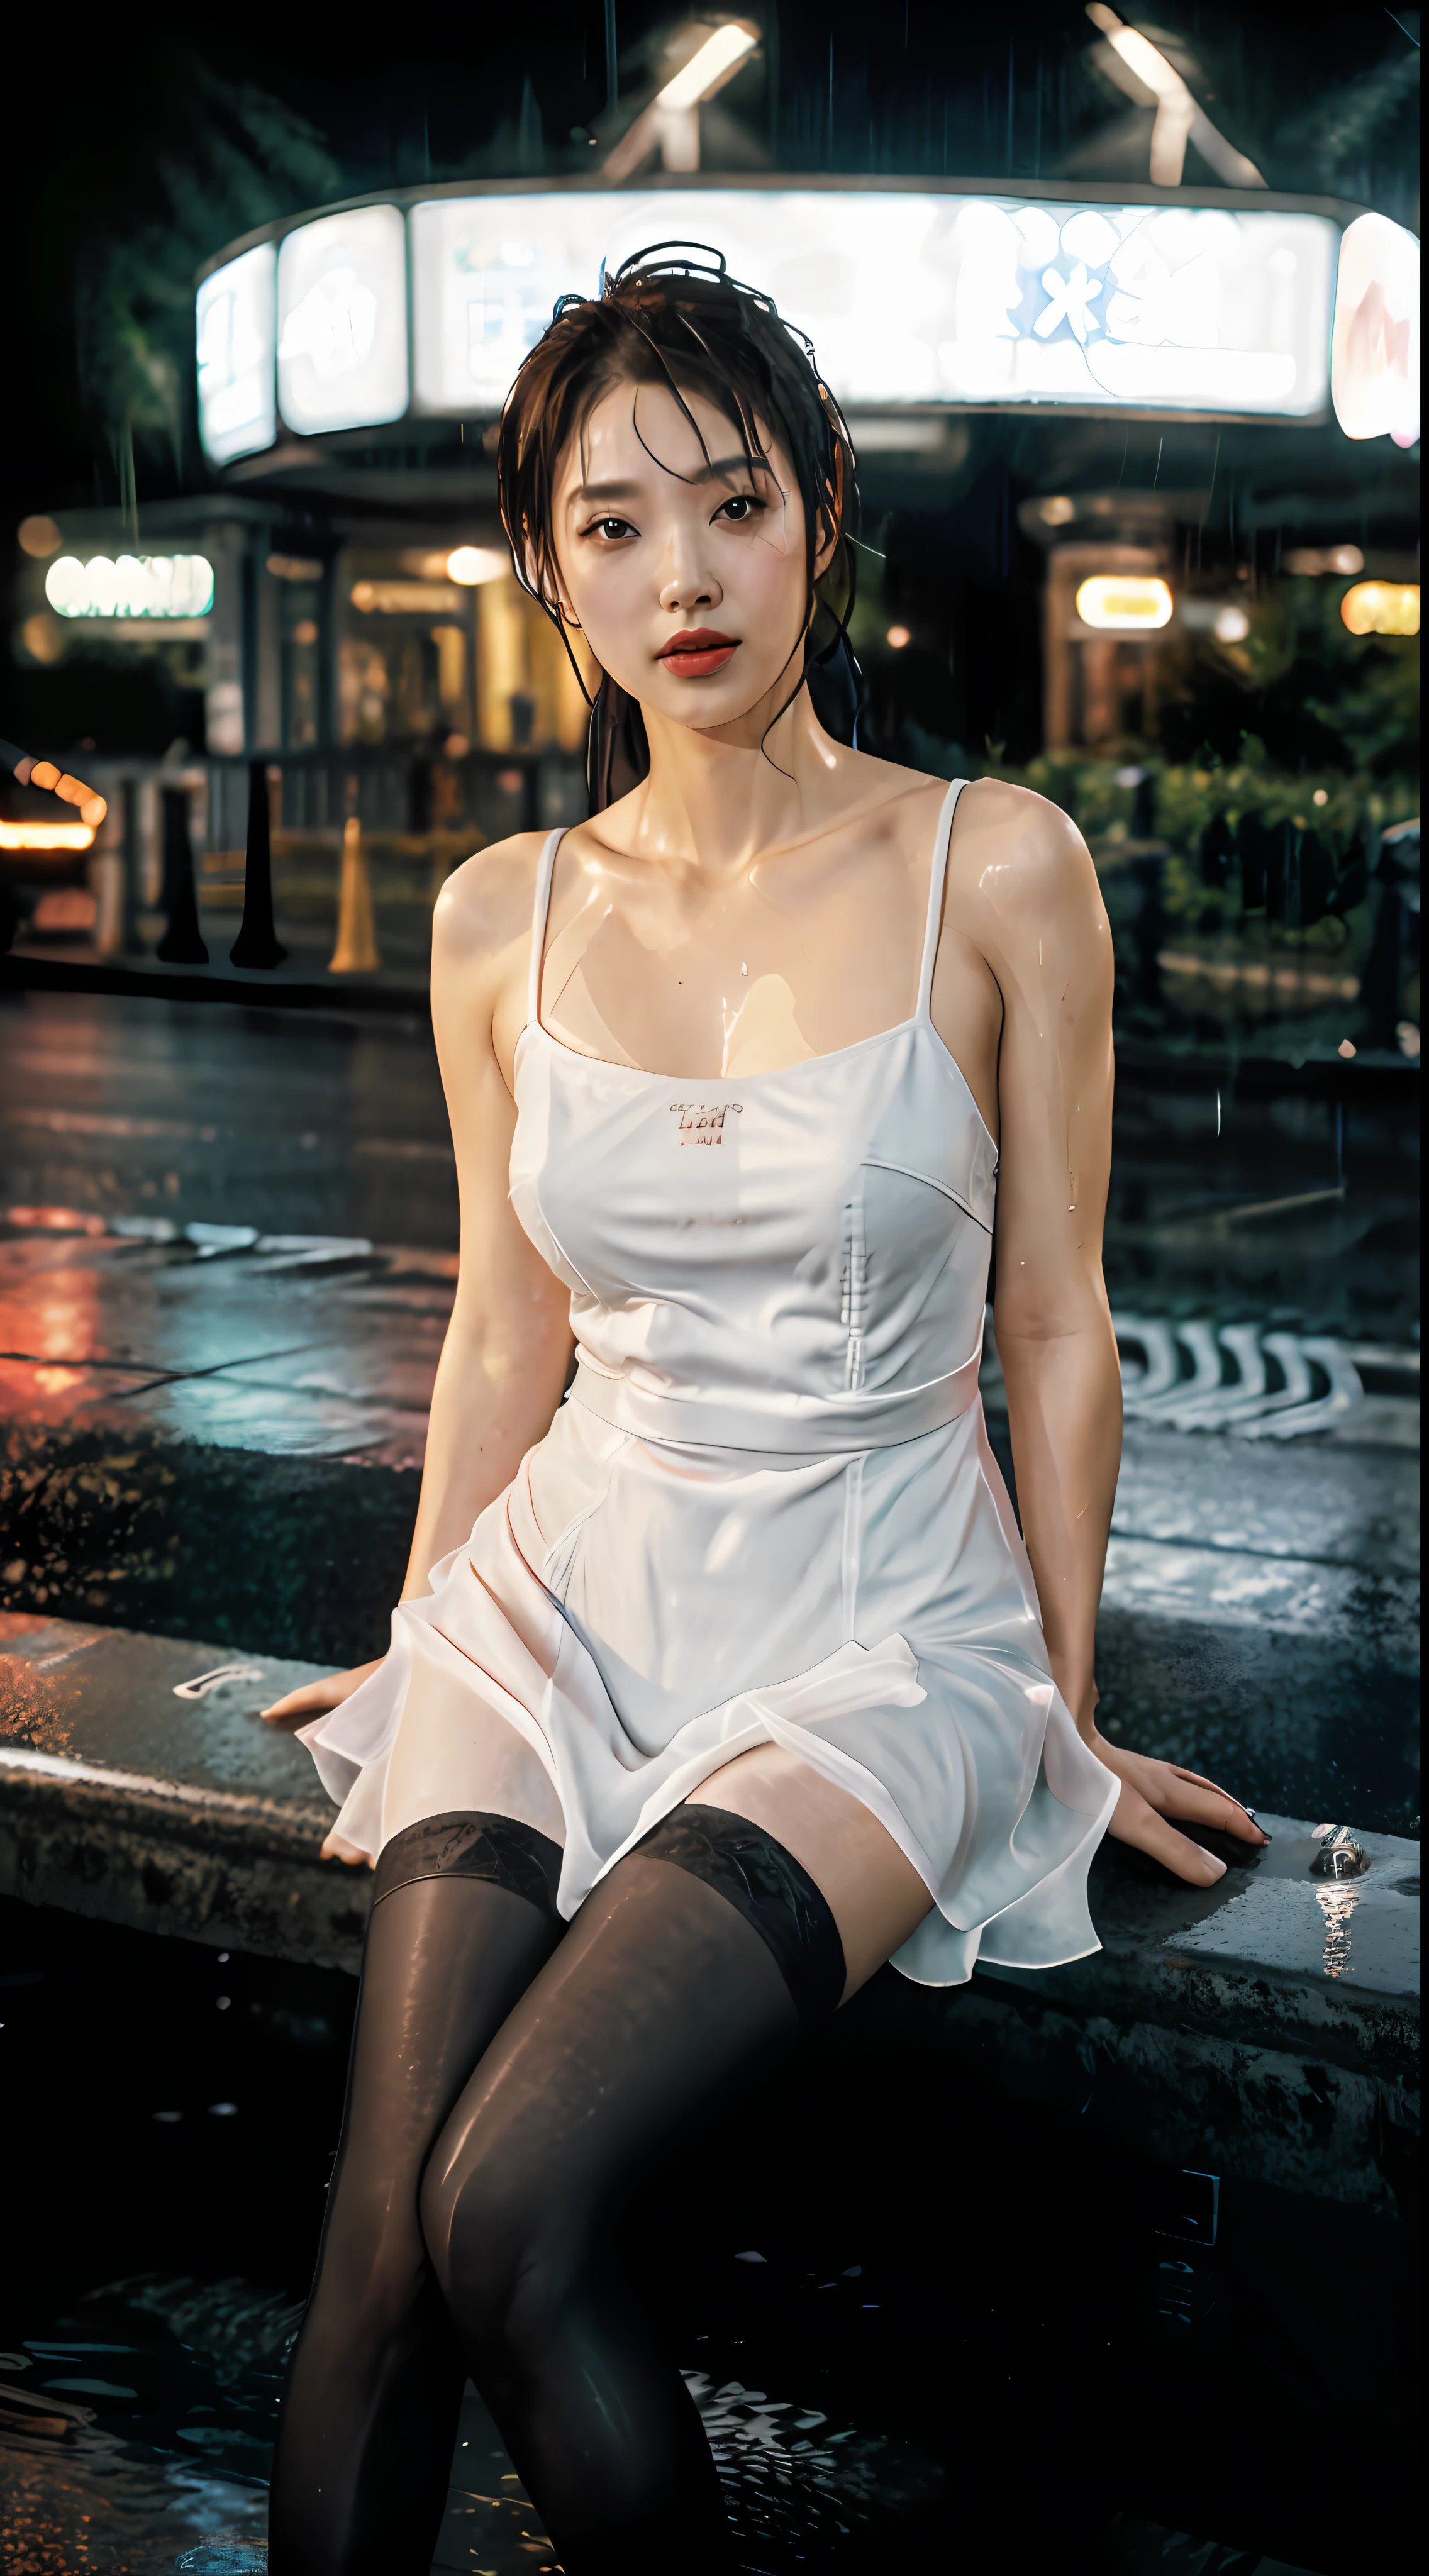 ((Realistic lighting, Best quality, 8K, Masterpiece: 1.3)), Clear focus: 1.2, 1girl, Perfect body beauty: 1.4, Slim abs: 1.1, (Big breasts), (White shirt: 1.4), (Outdoor, night: 1.1), (Standing), City Street, Super Fine Face, Fine Eyes, Double Eyelids, (Over the Knee Black Stockings: 1.5), (Wet in the rain, Wet: 1.2)